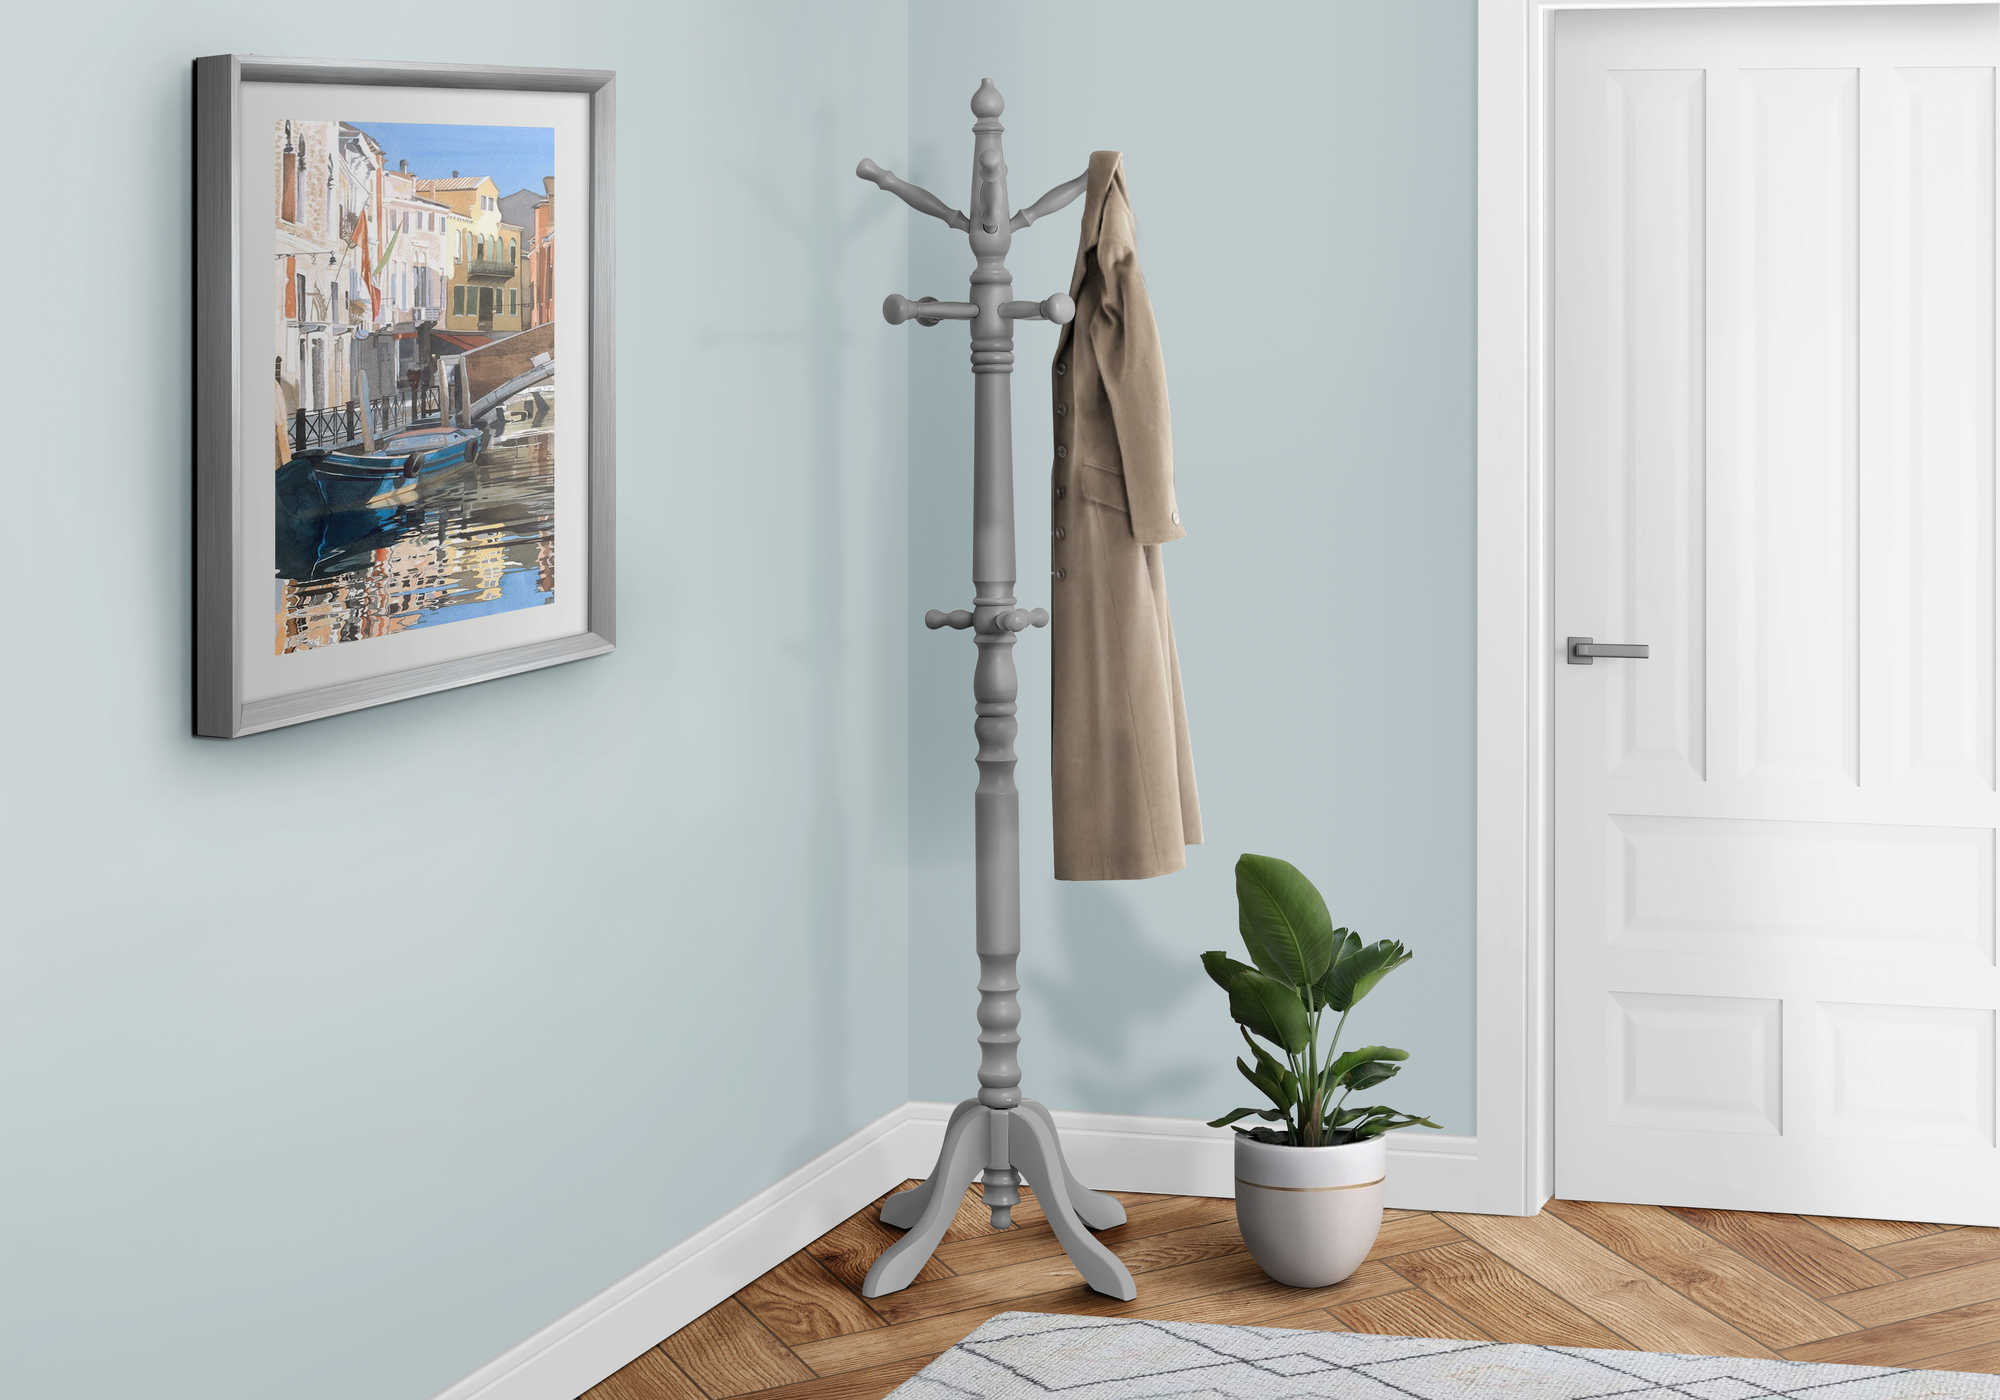 COAT RACK - 73"H / GREY WOOD TRADITIONAL STYLE